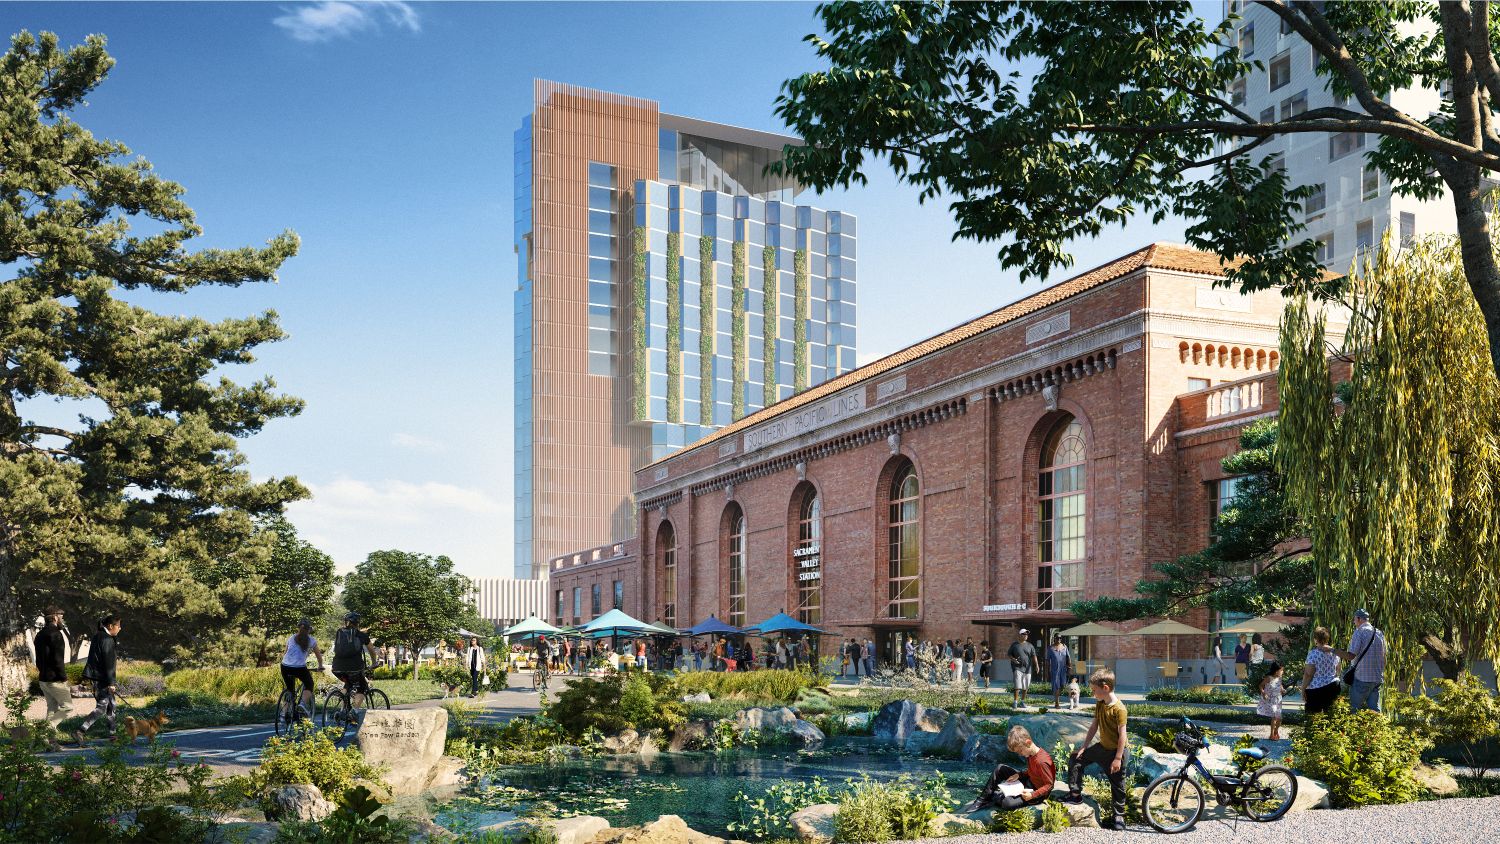 Rendering from the SVS Area Plan showing the front of the station in a future park setting and proposed hotel in the background